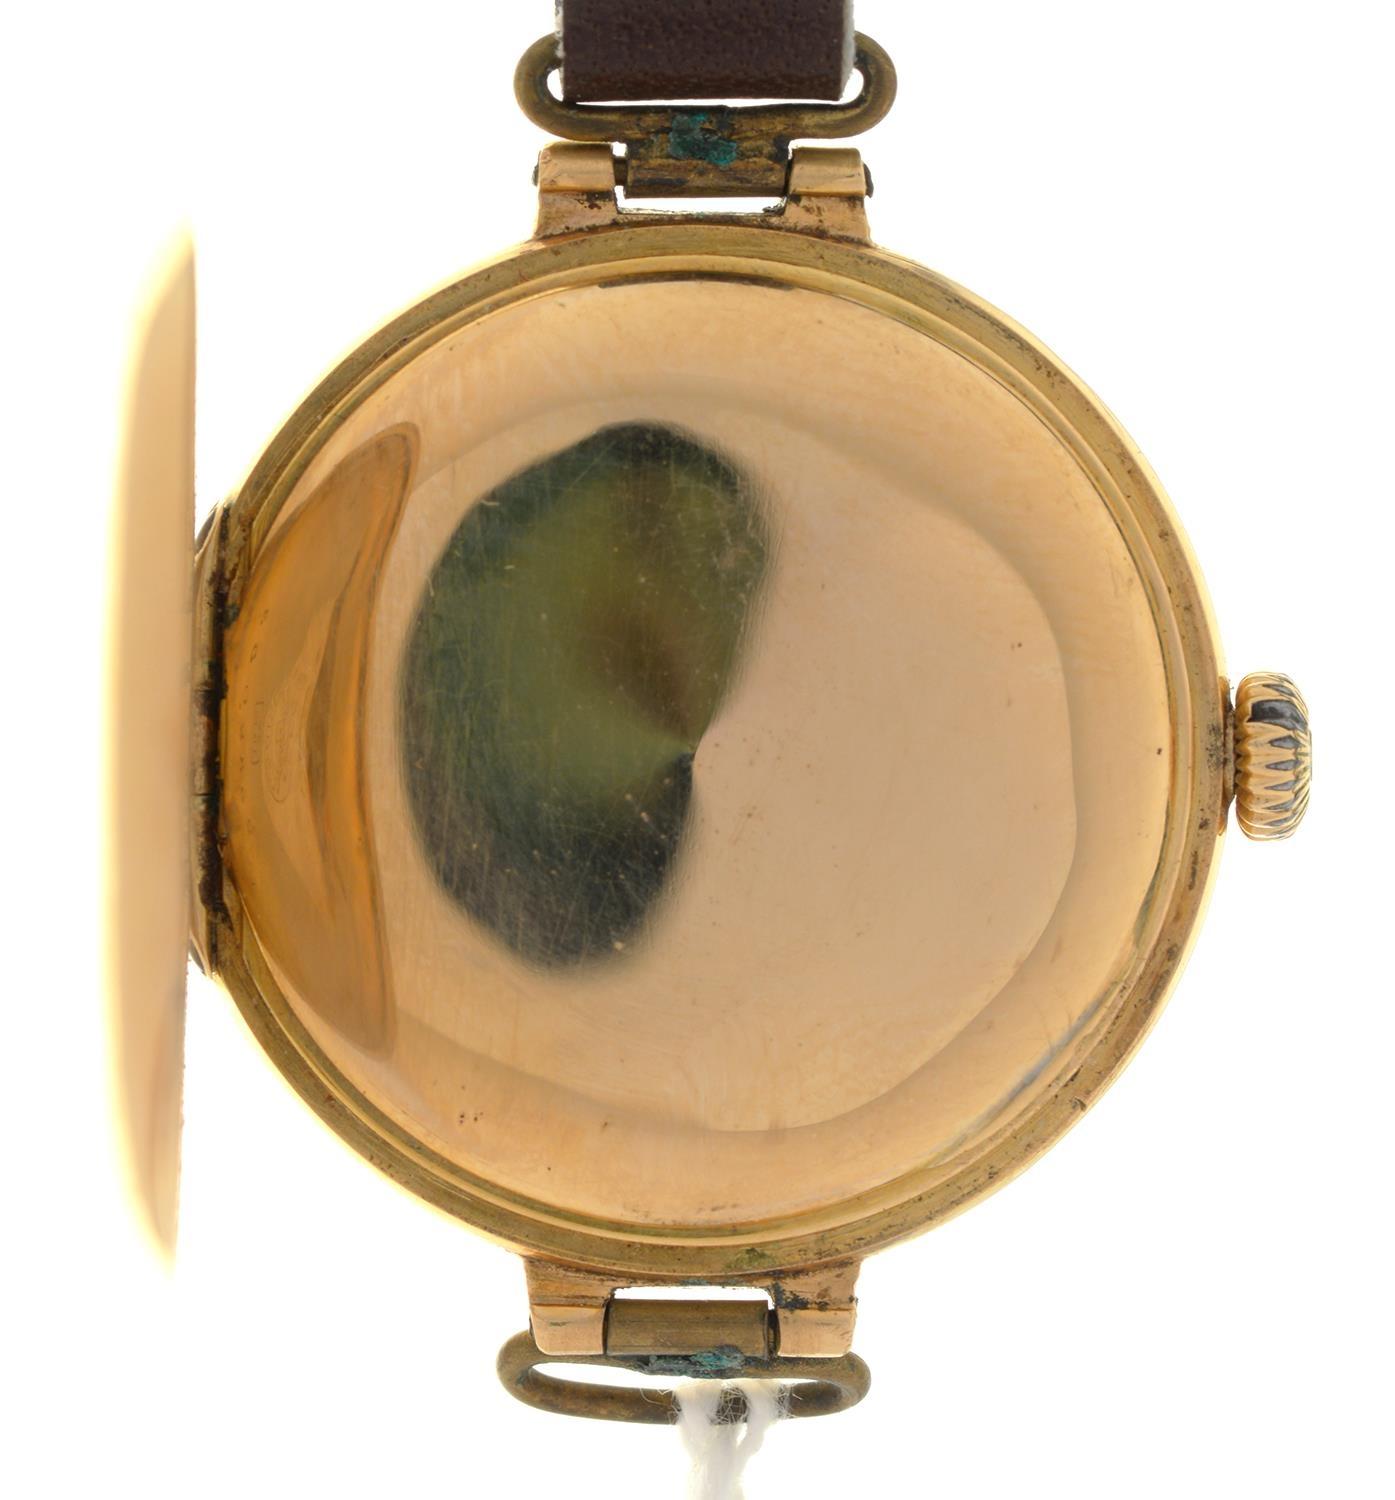 A 18CT GOLD LONGINES LADY'S WRISTWATCH, C1920,  WITH ENAMEL DIAL AND GOLD CUVETTE, 29MM, SWISS - Image 4 of 4